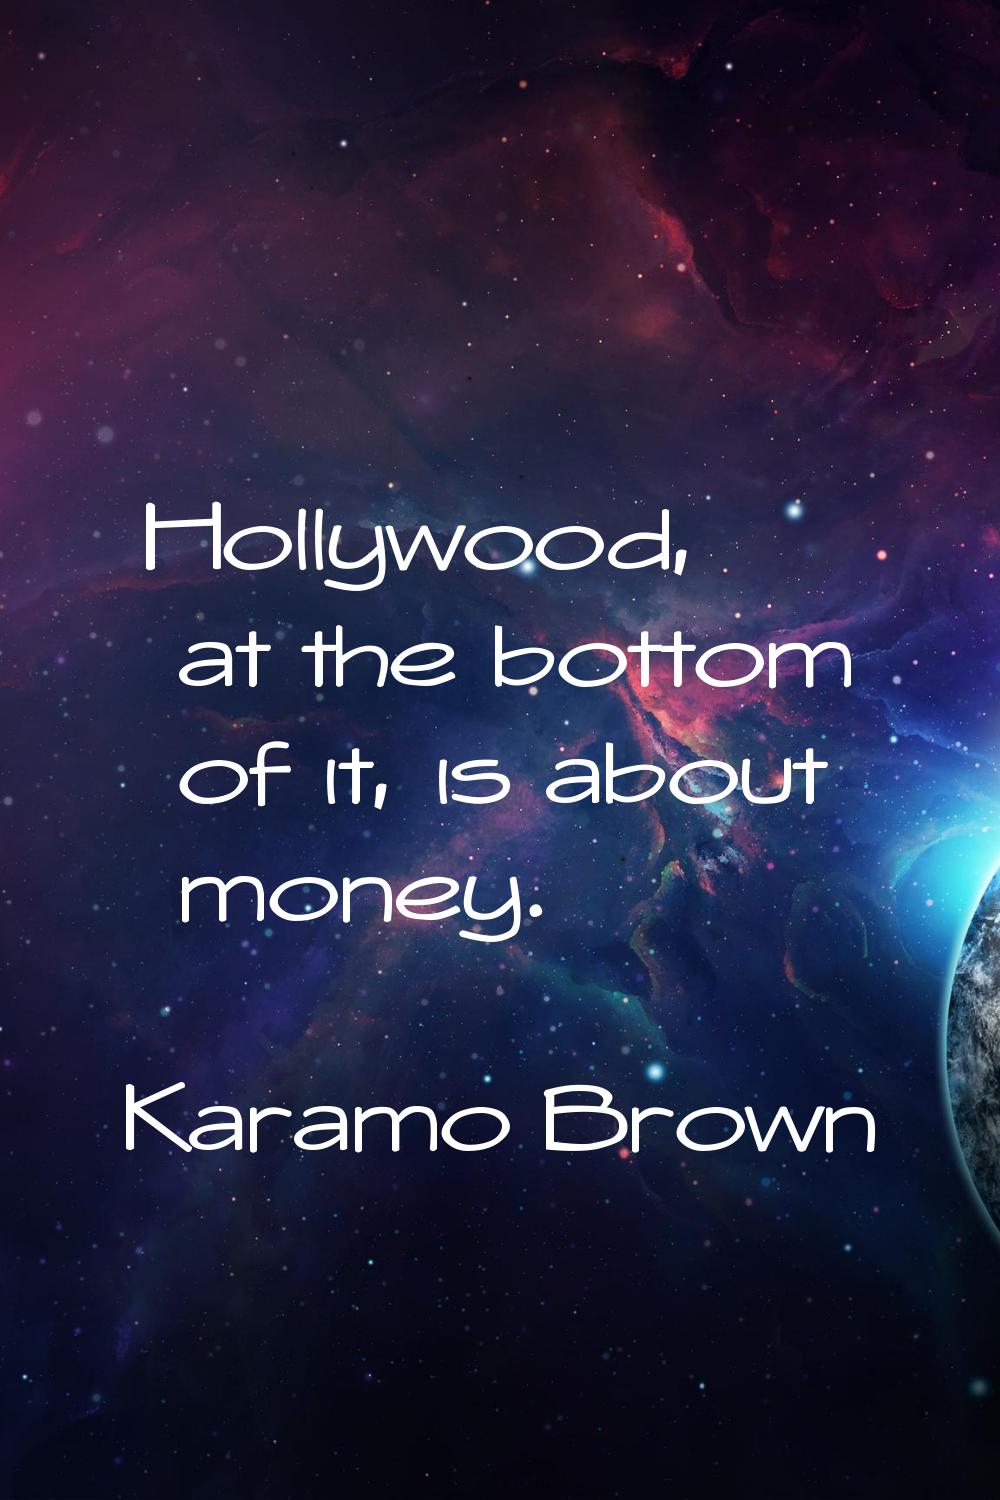 Hollywood, at the bottom of it, is about money.